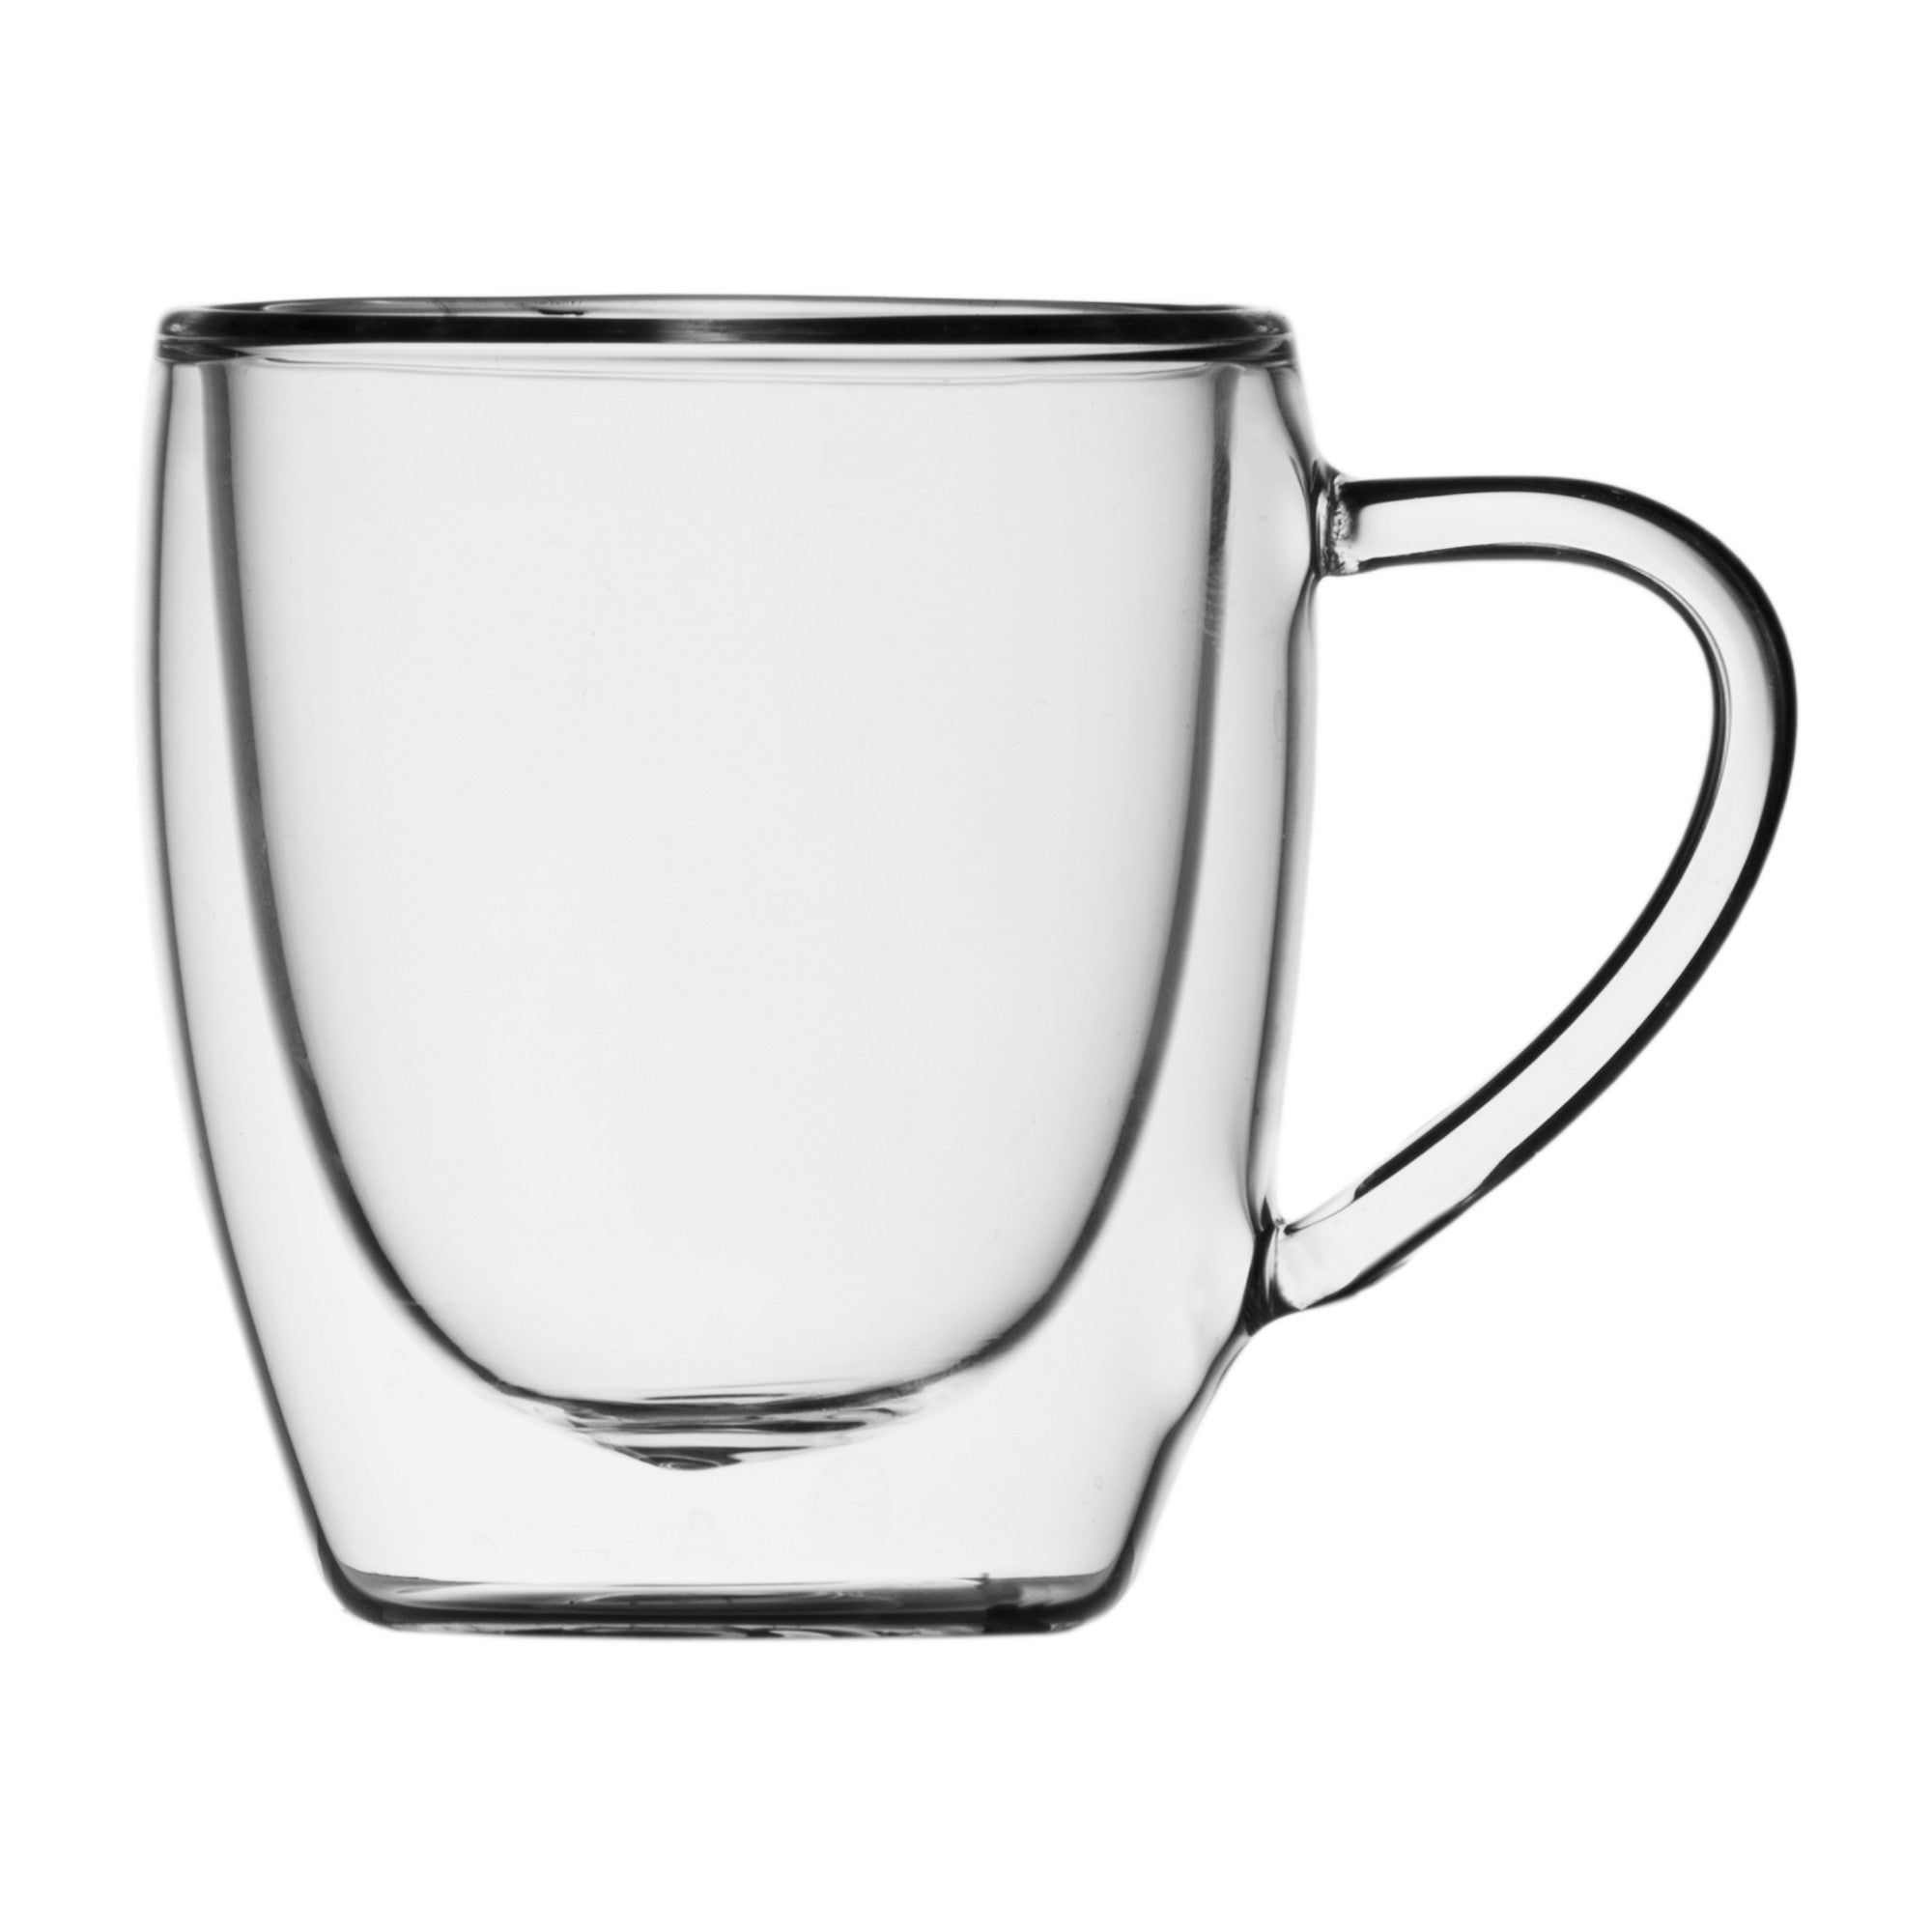 Insulated Double Wall Mug Cup Glass-Set of 4 Mugs/Cups Thermal,435ml, Clear, Safdie Co.